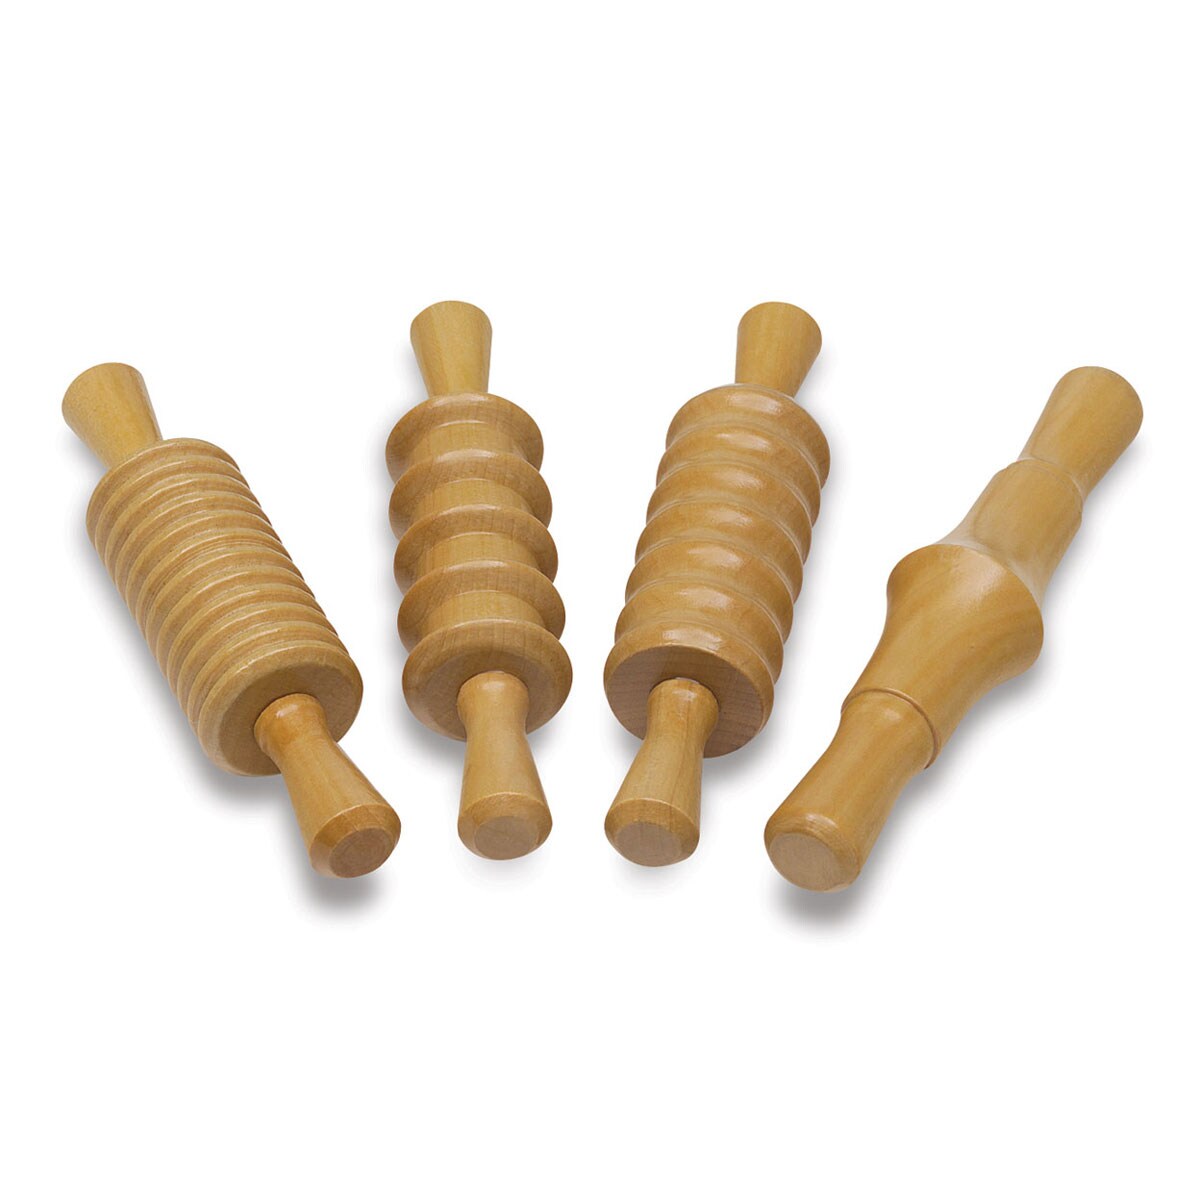 Rolling Wooden Tools - Set of 4